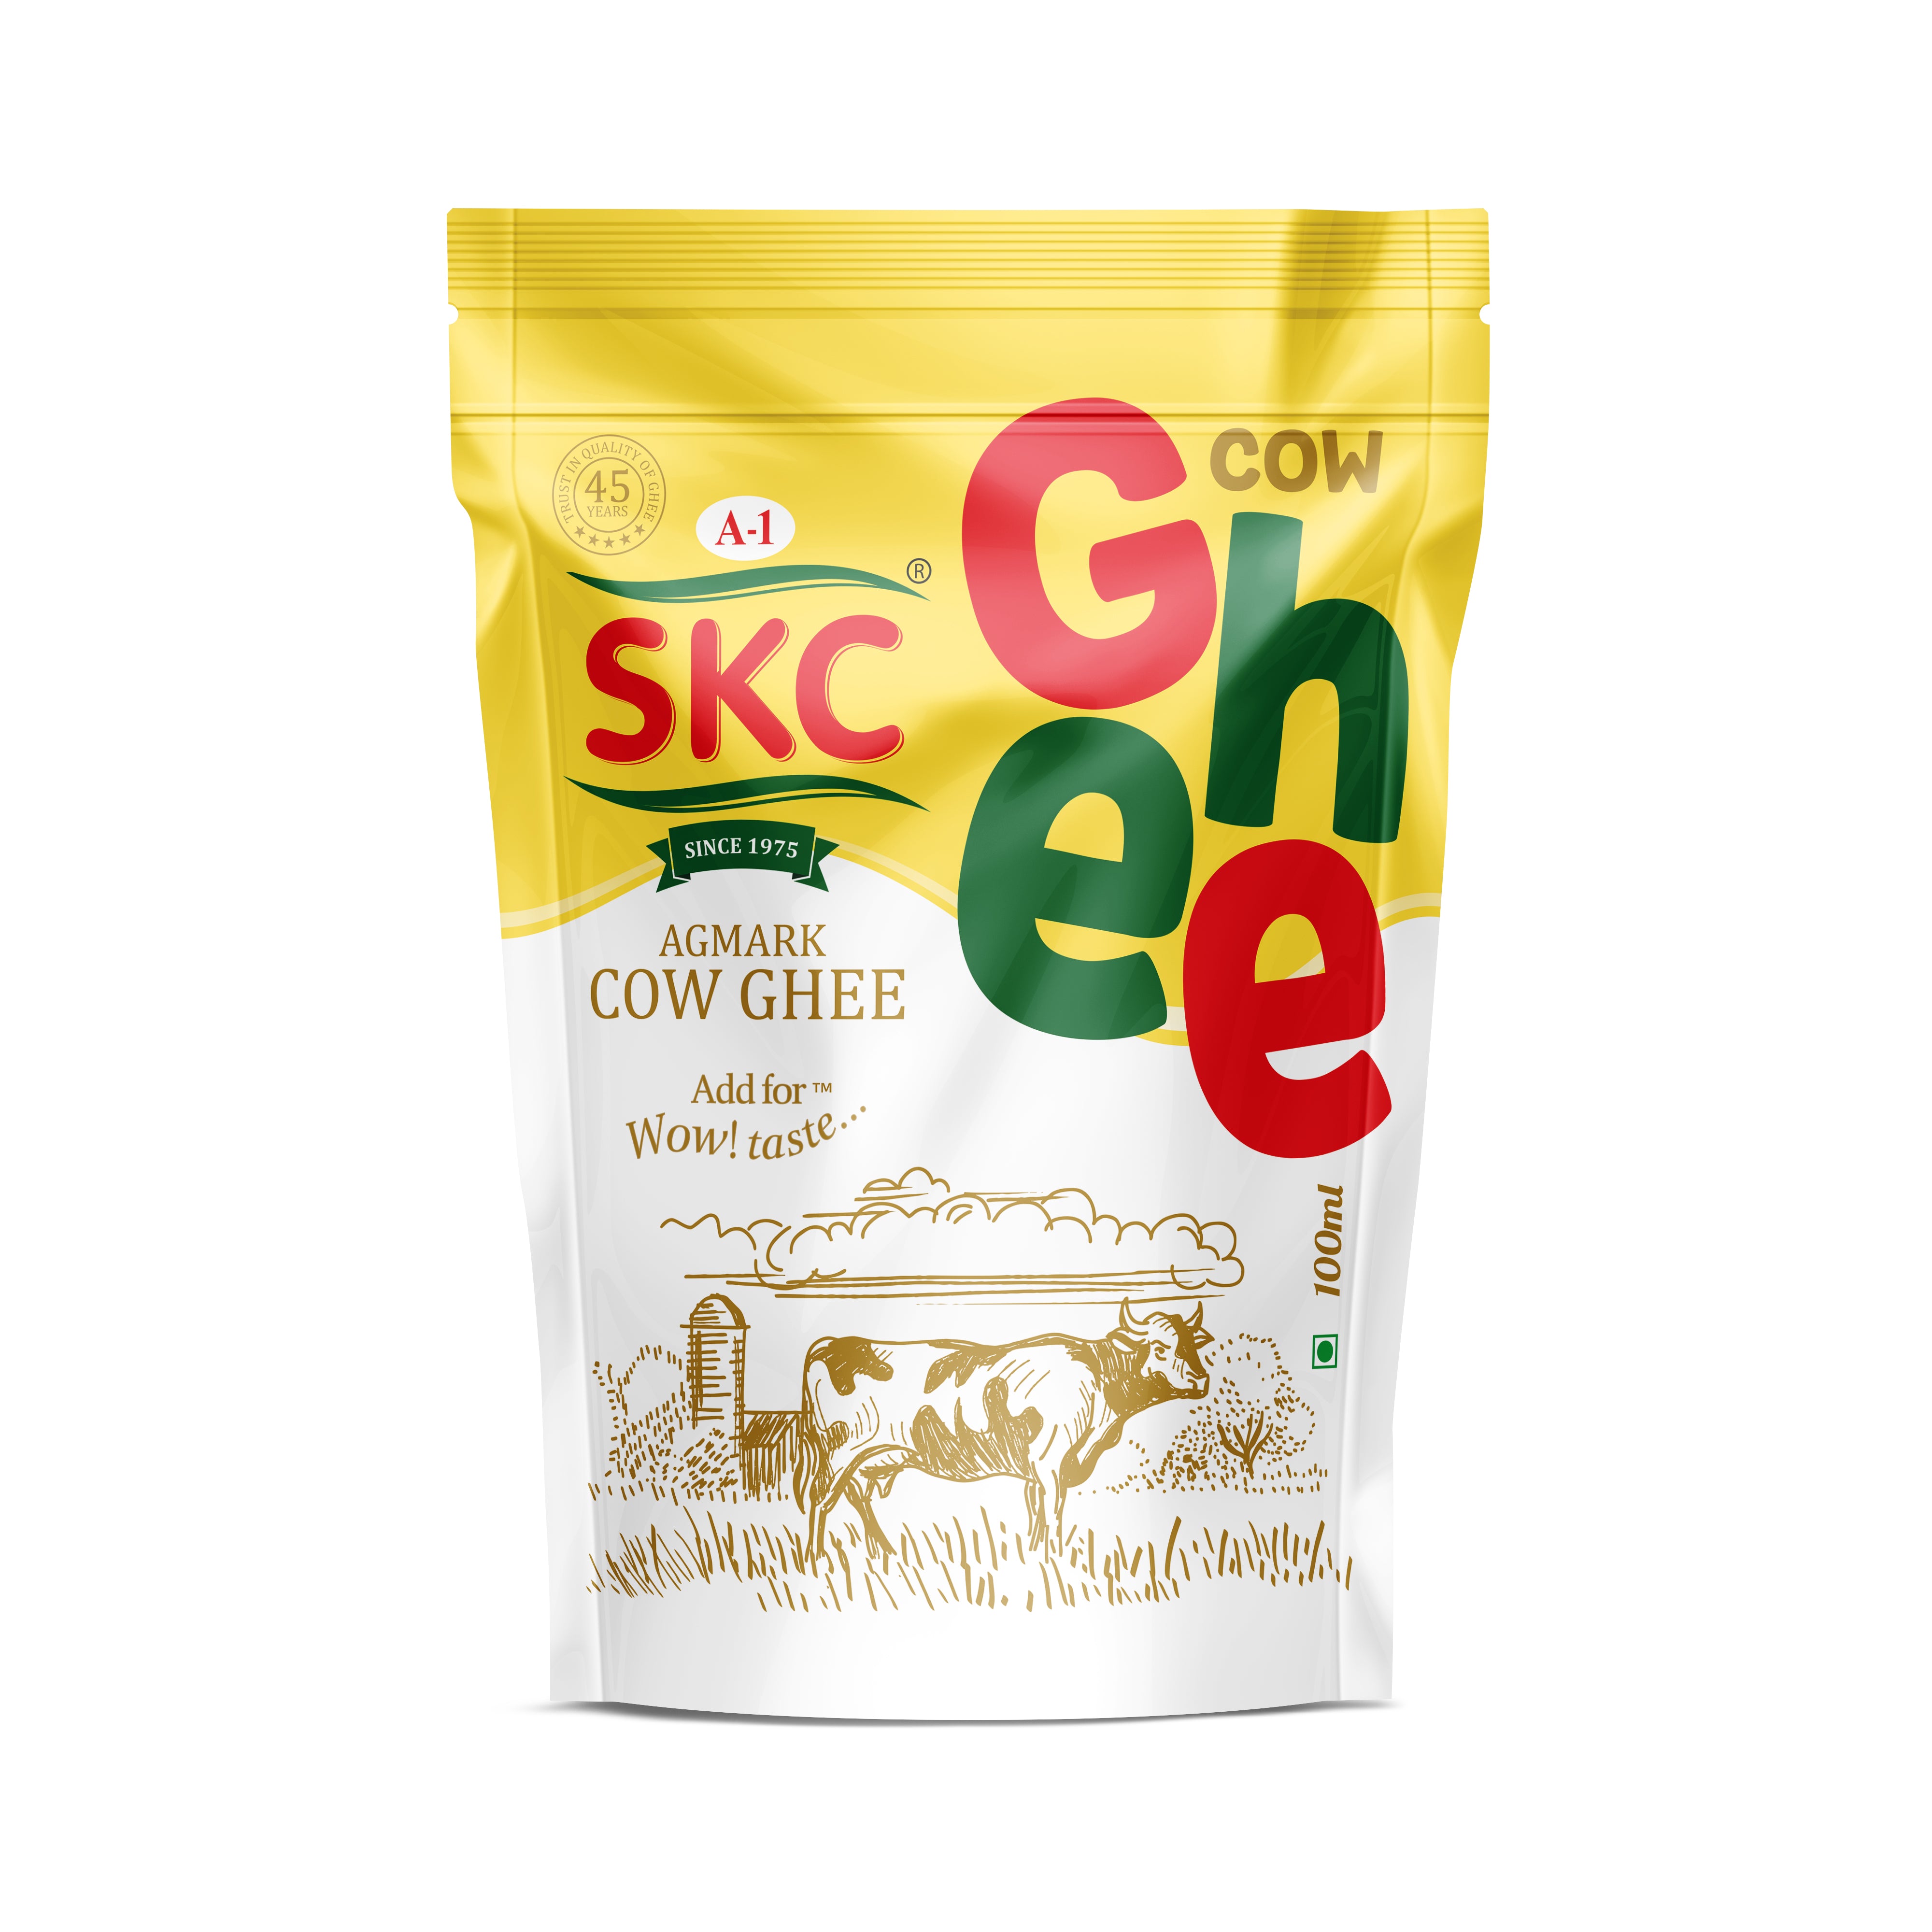 A1 SKC Pure Cow Ghee 50 ml Pouch - Pack of 10